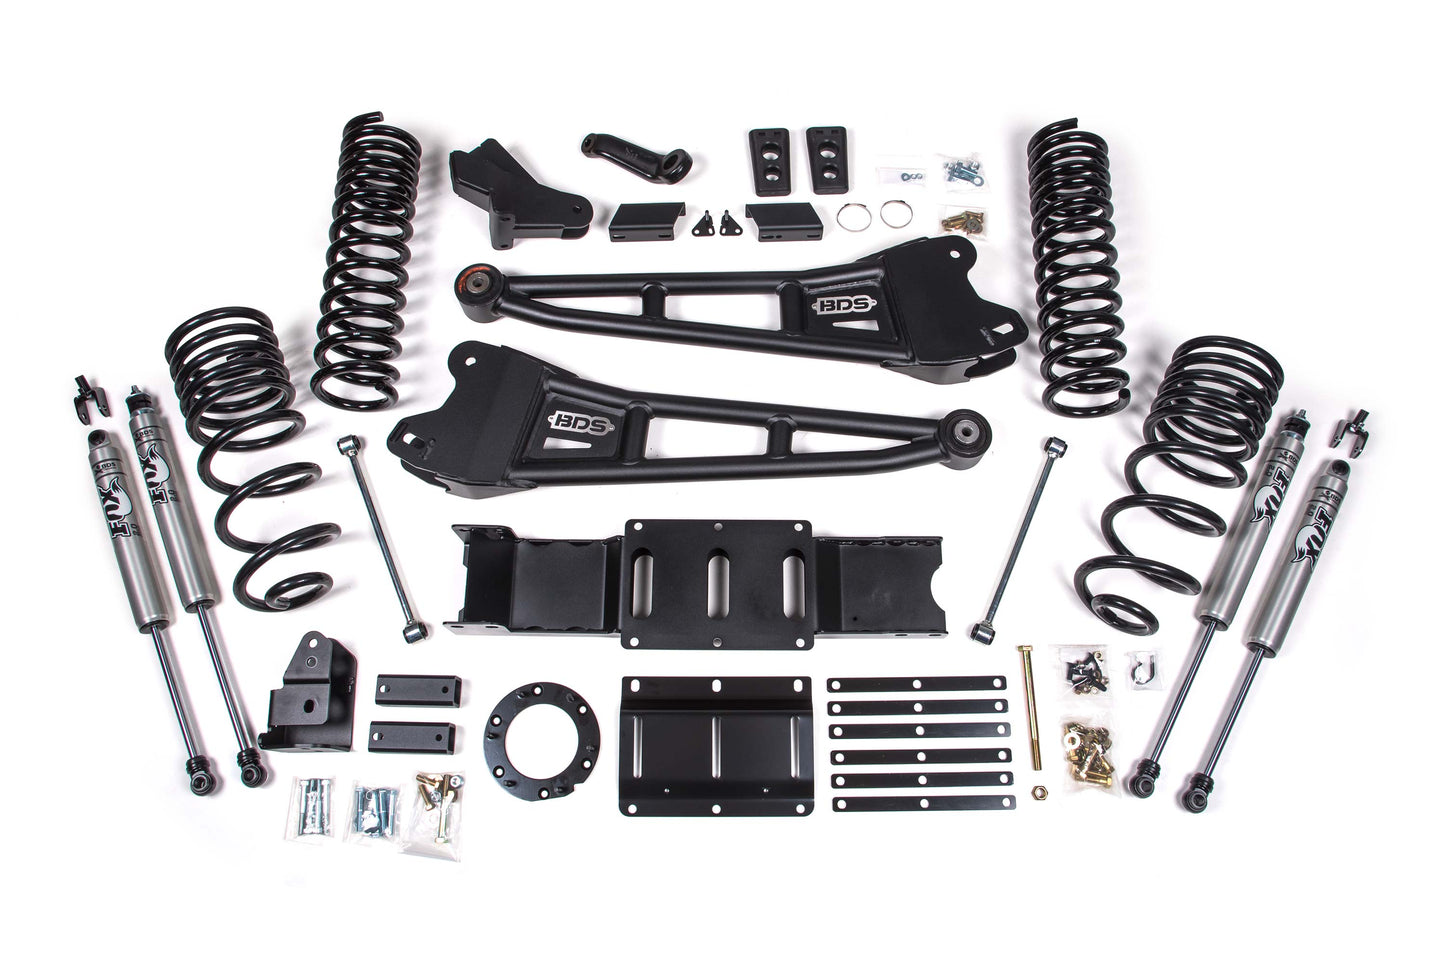 BDS 4" Lift Kit for 2019+ Ram 2500 with Fox 2.0 Shocks